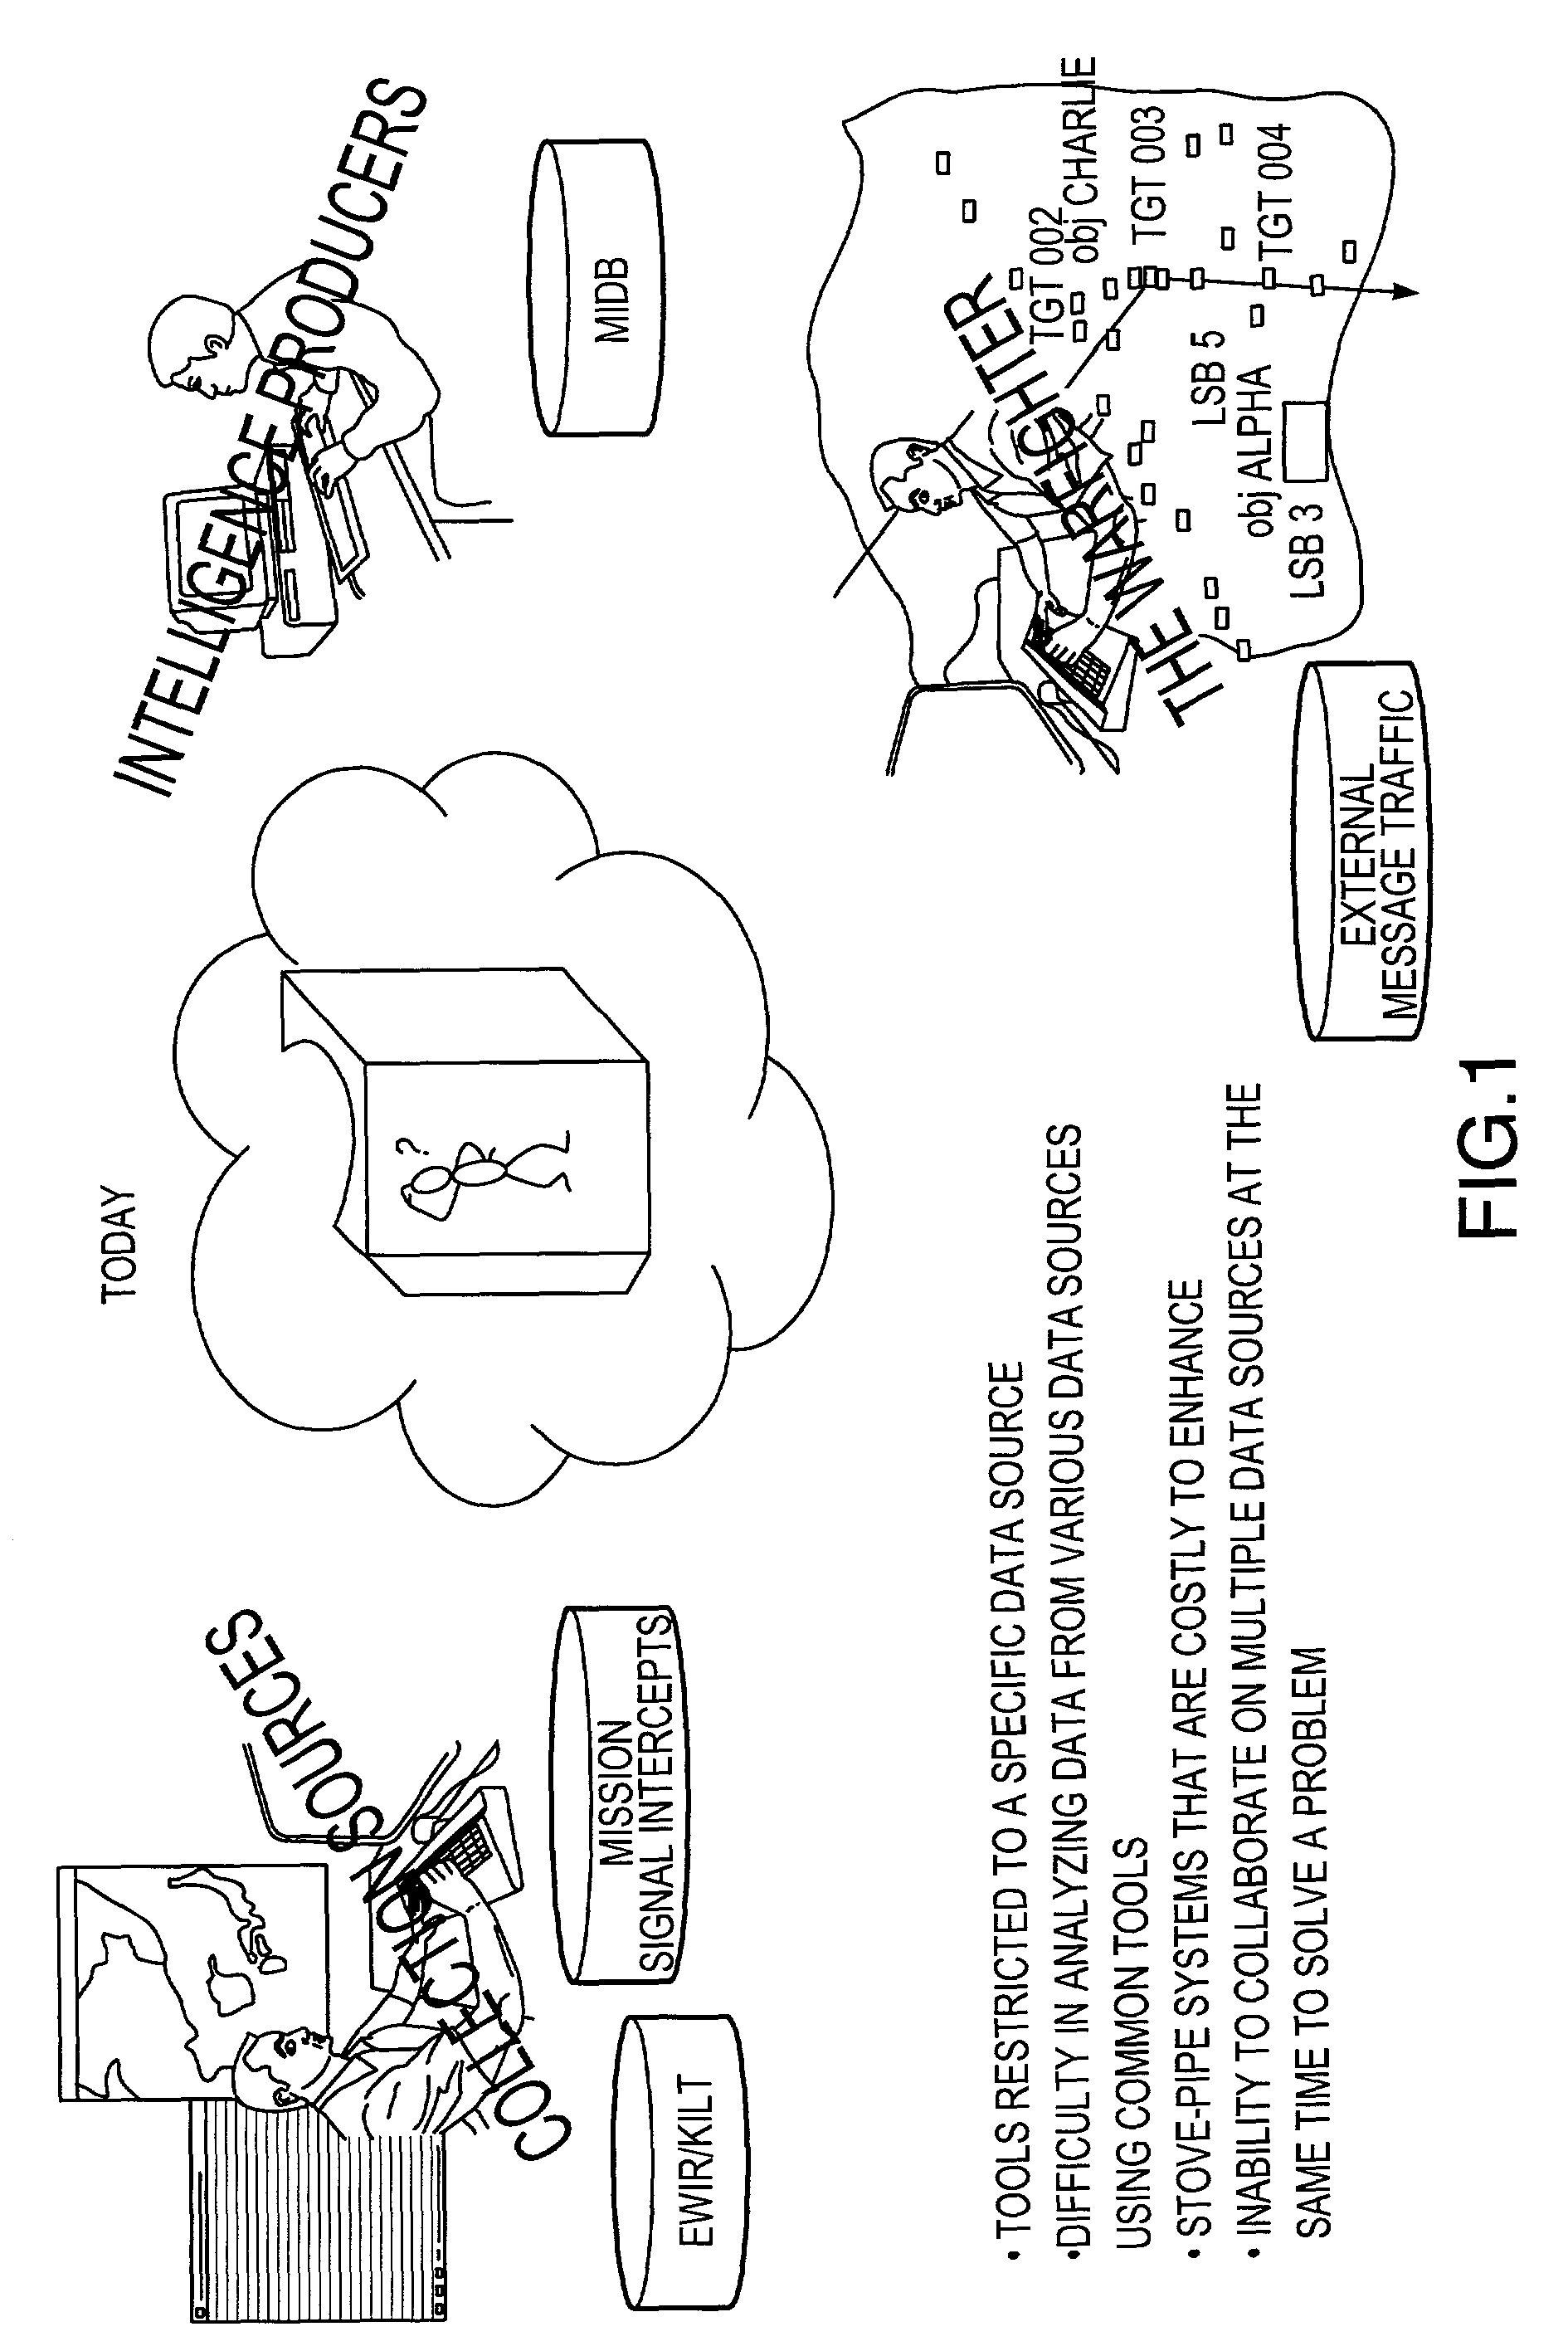 Information access, collaboration and integration system and method